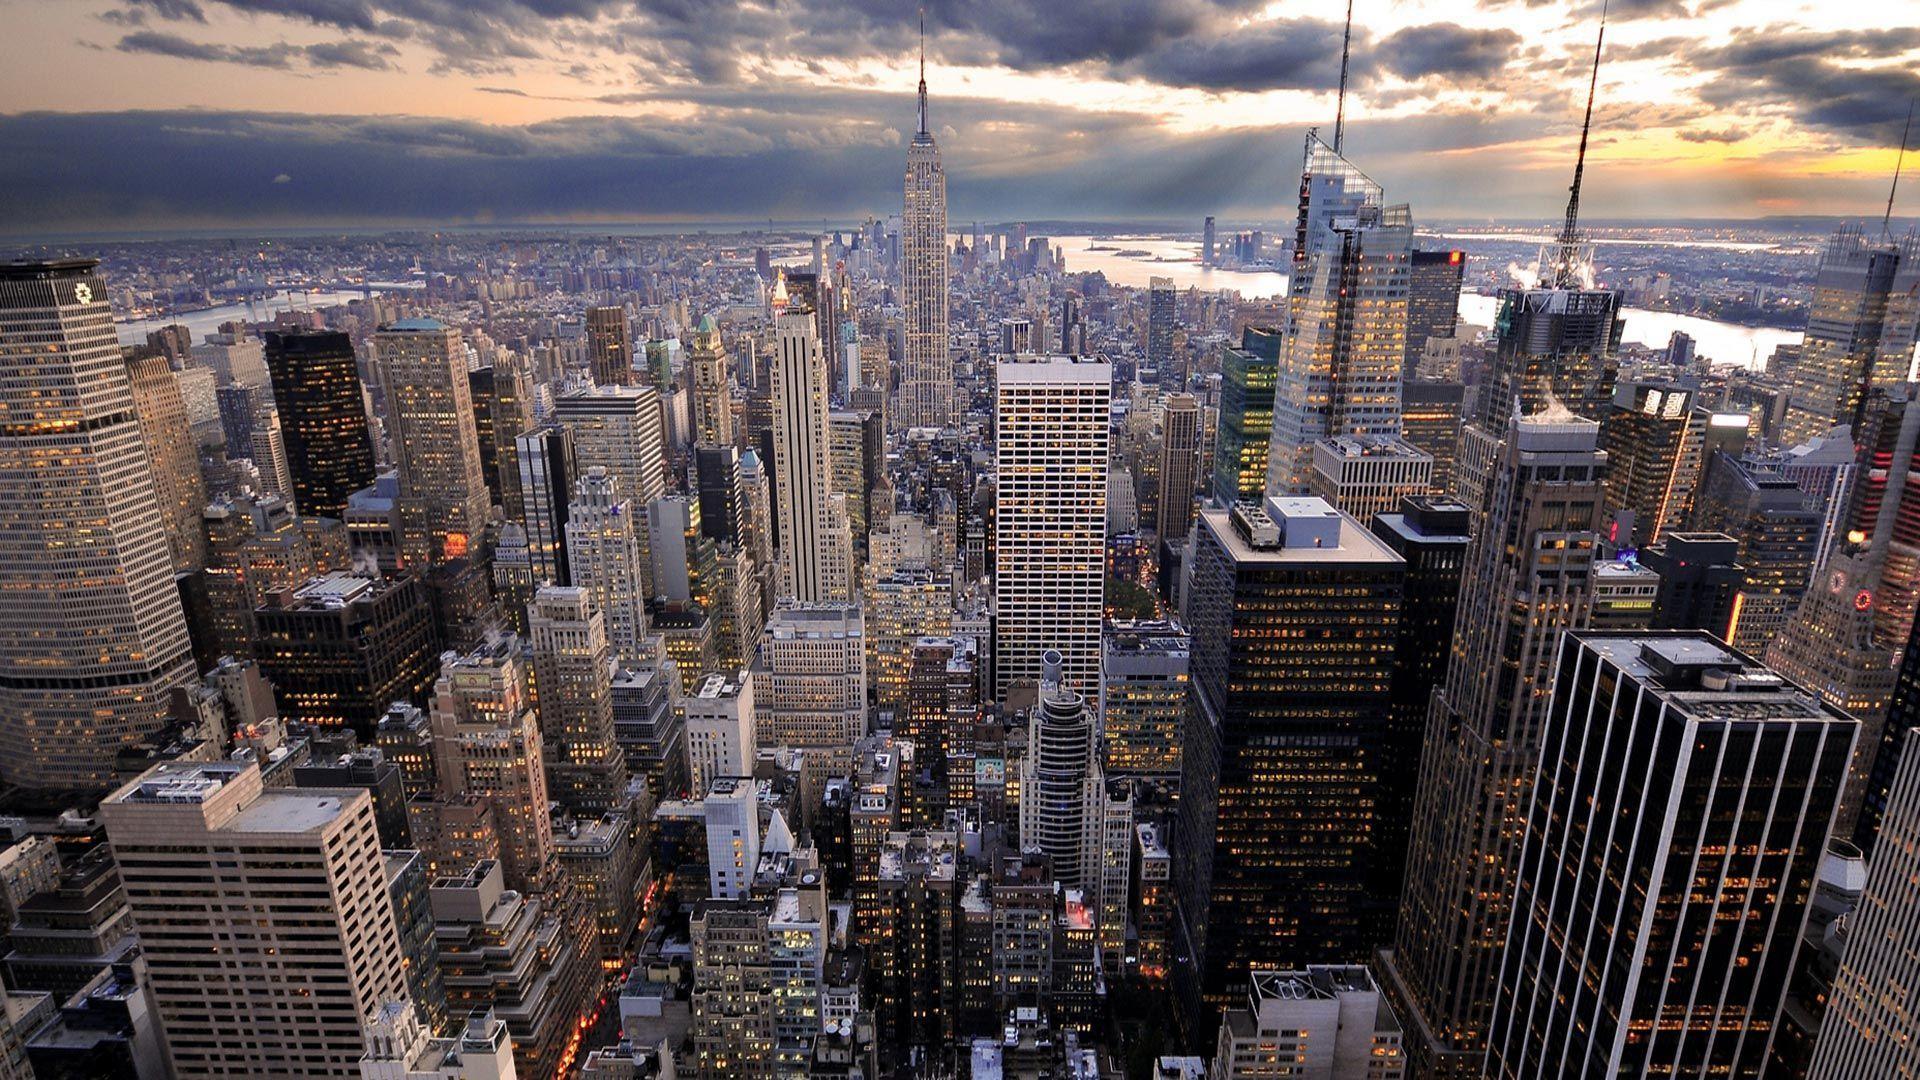 New York Landscape Wallpapers Top Free New York Landscape Backgrounds